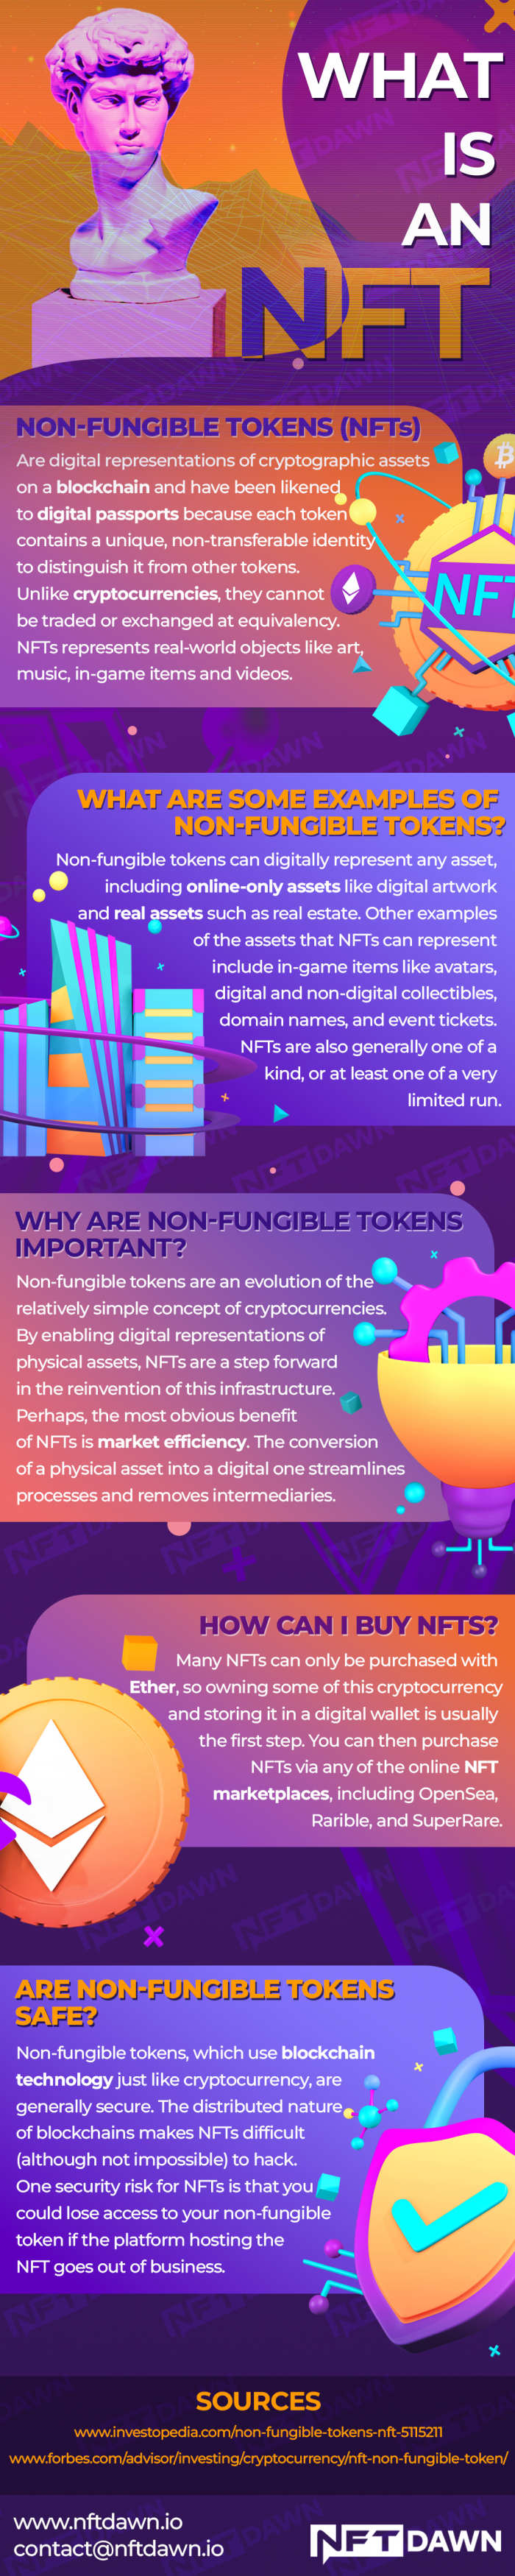 What Are Non-Fungible Tokens